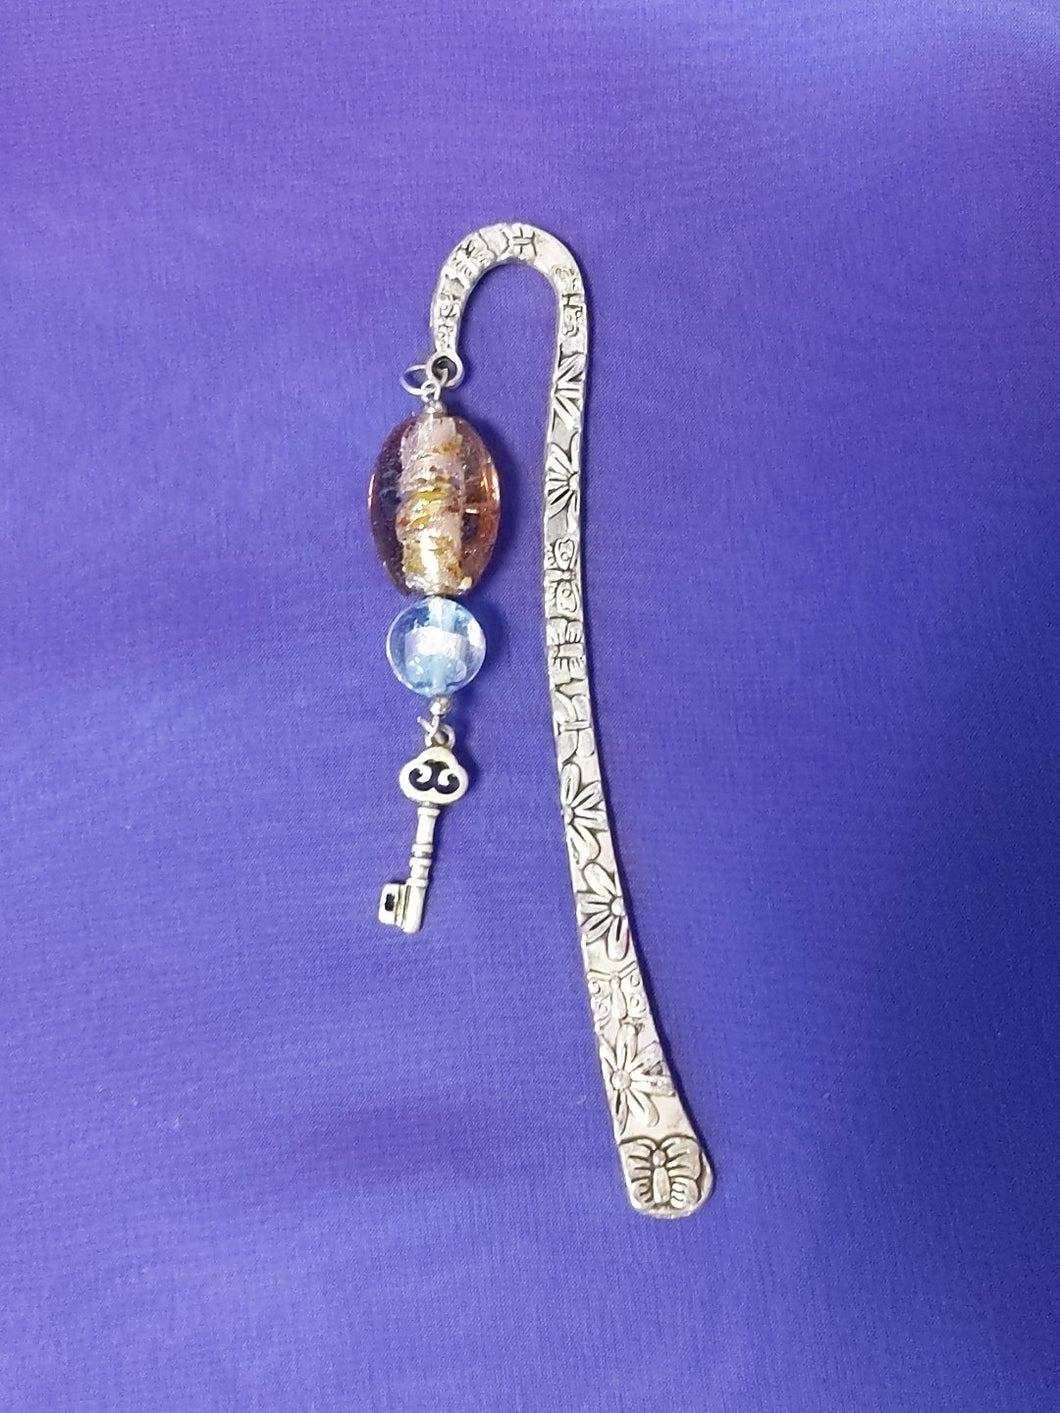 Metal Book Mark with Charm - Key